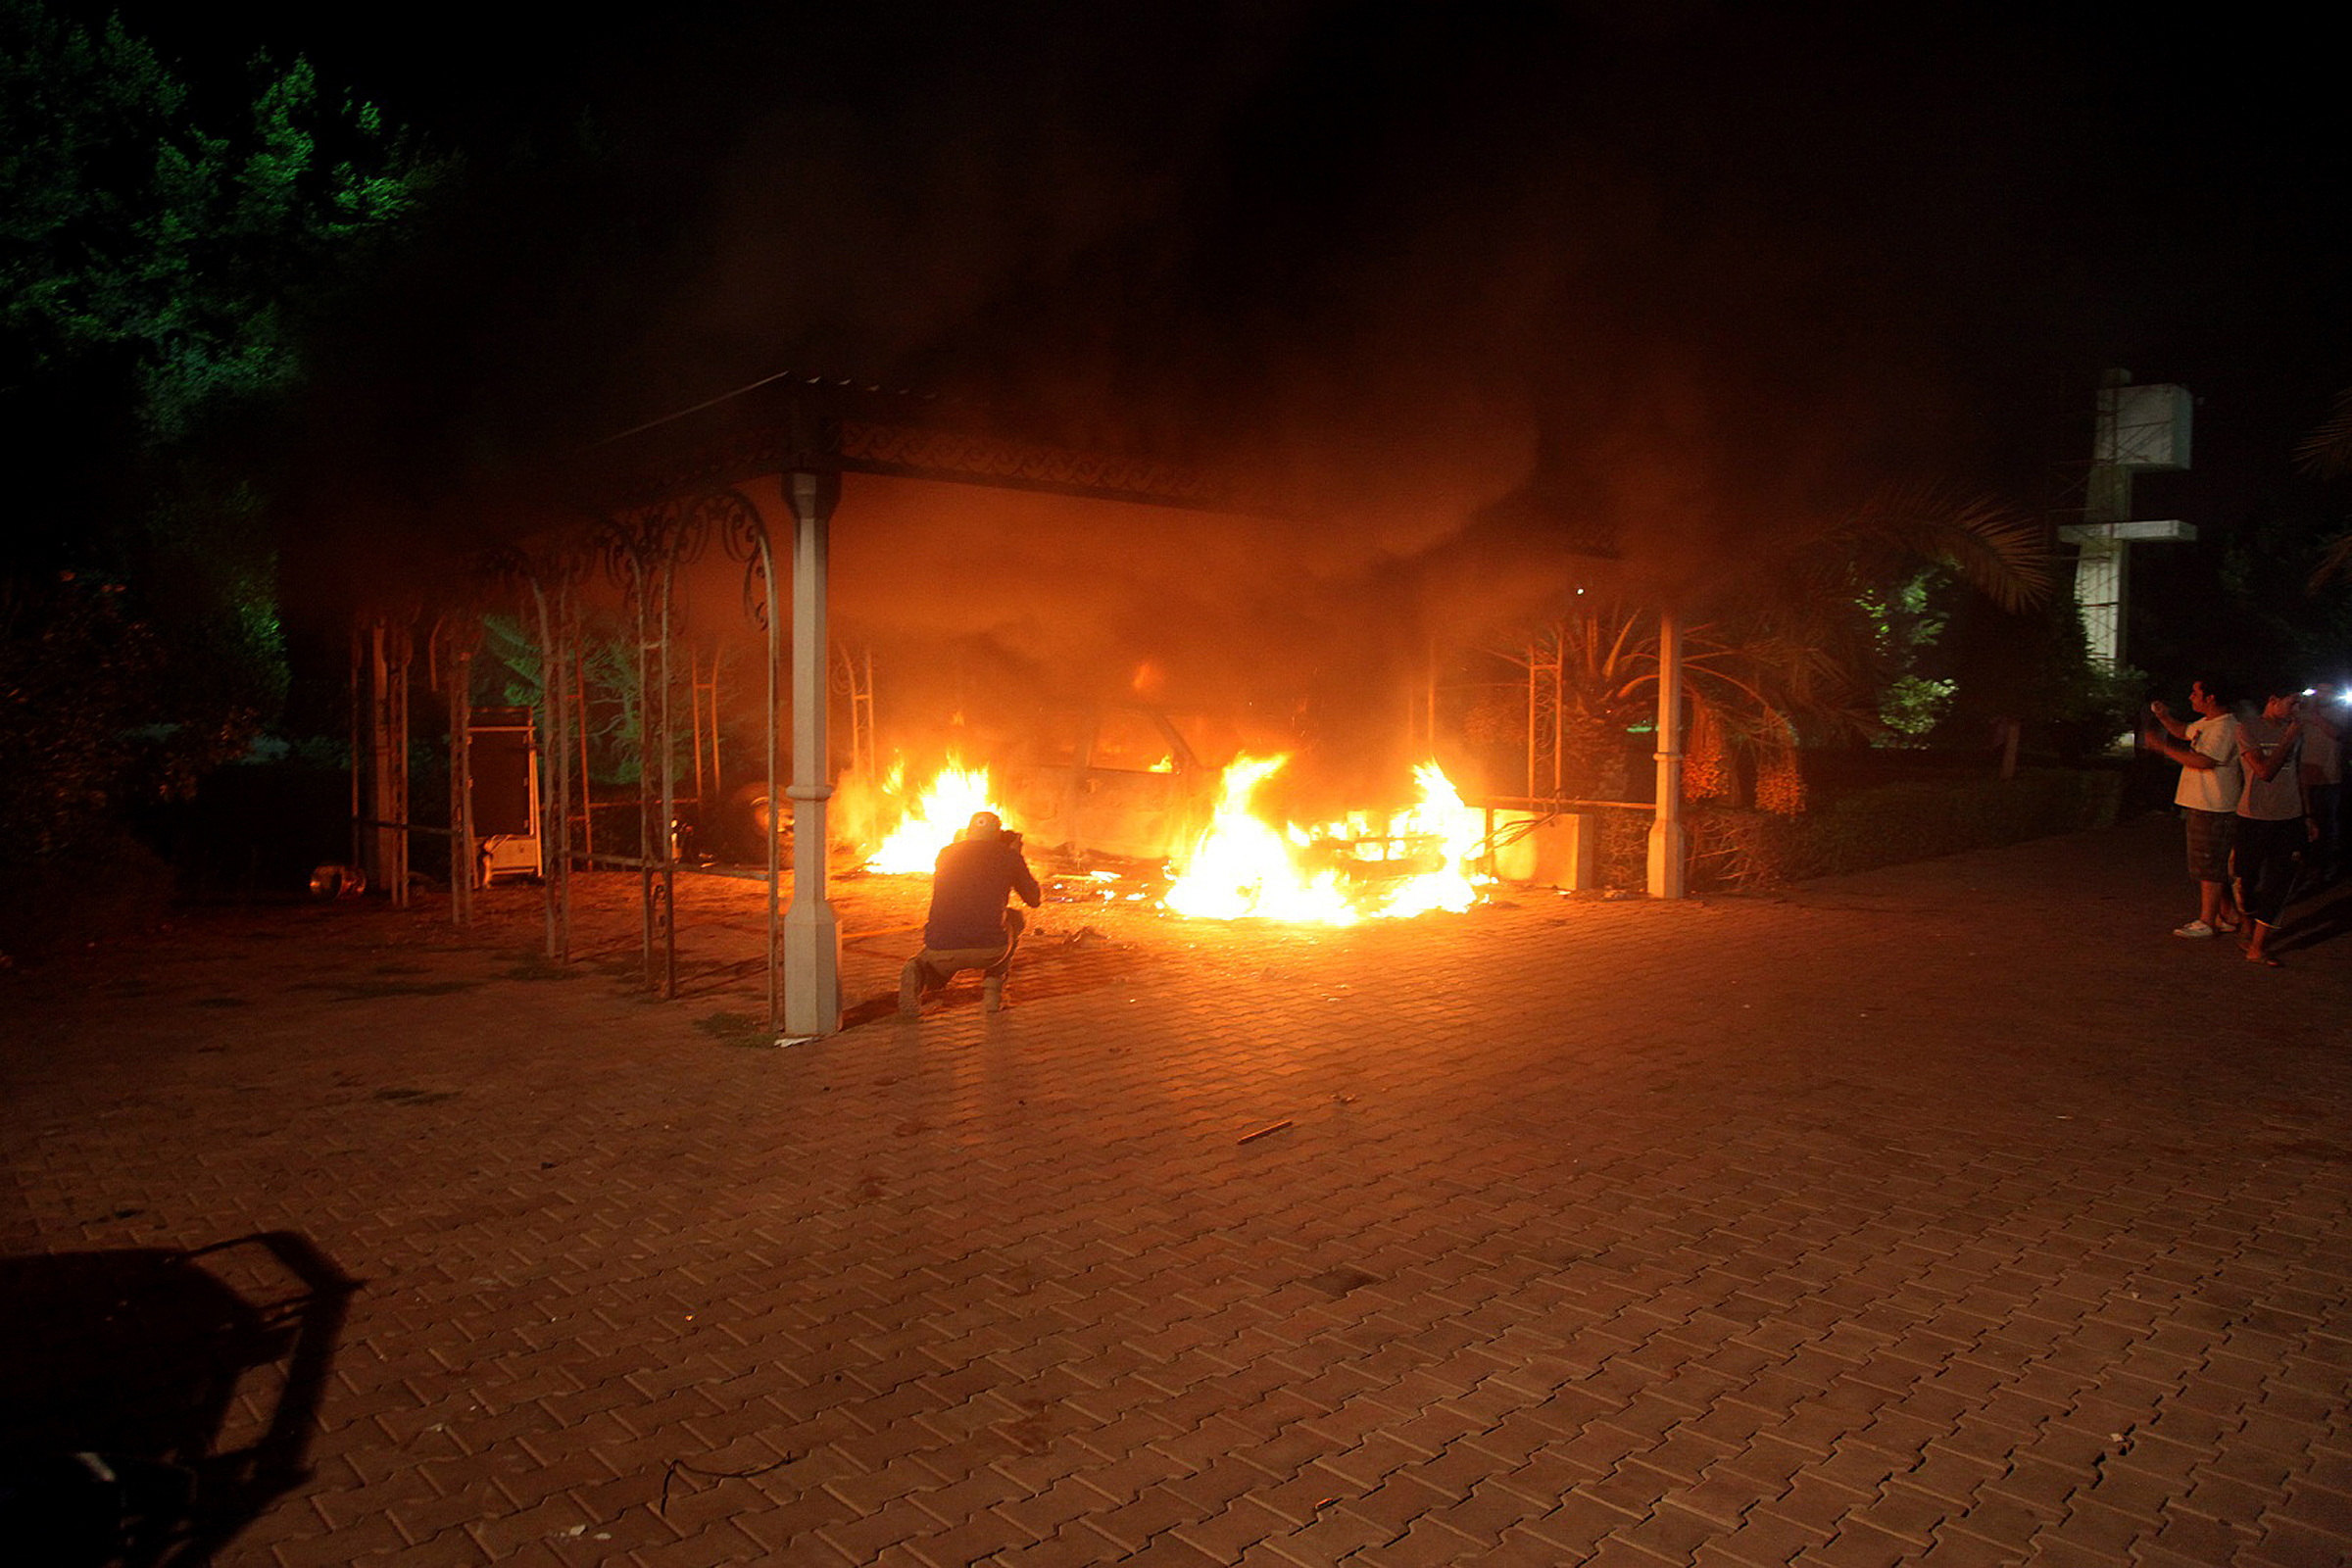 Man questioned in Libya over Benghazi attack - CBS News